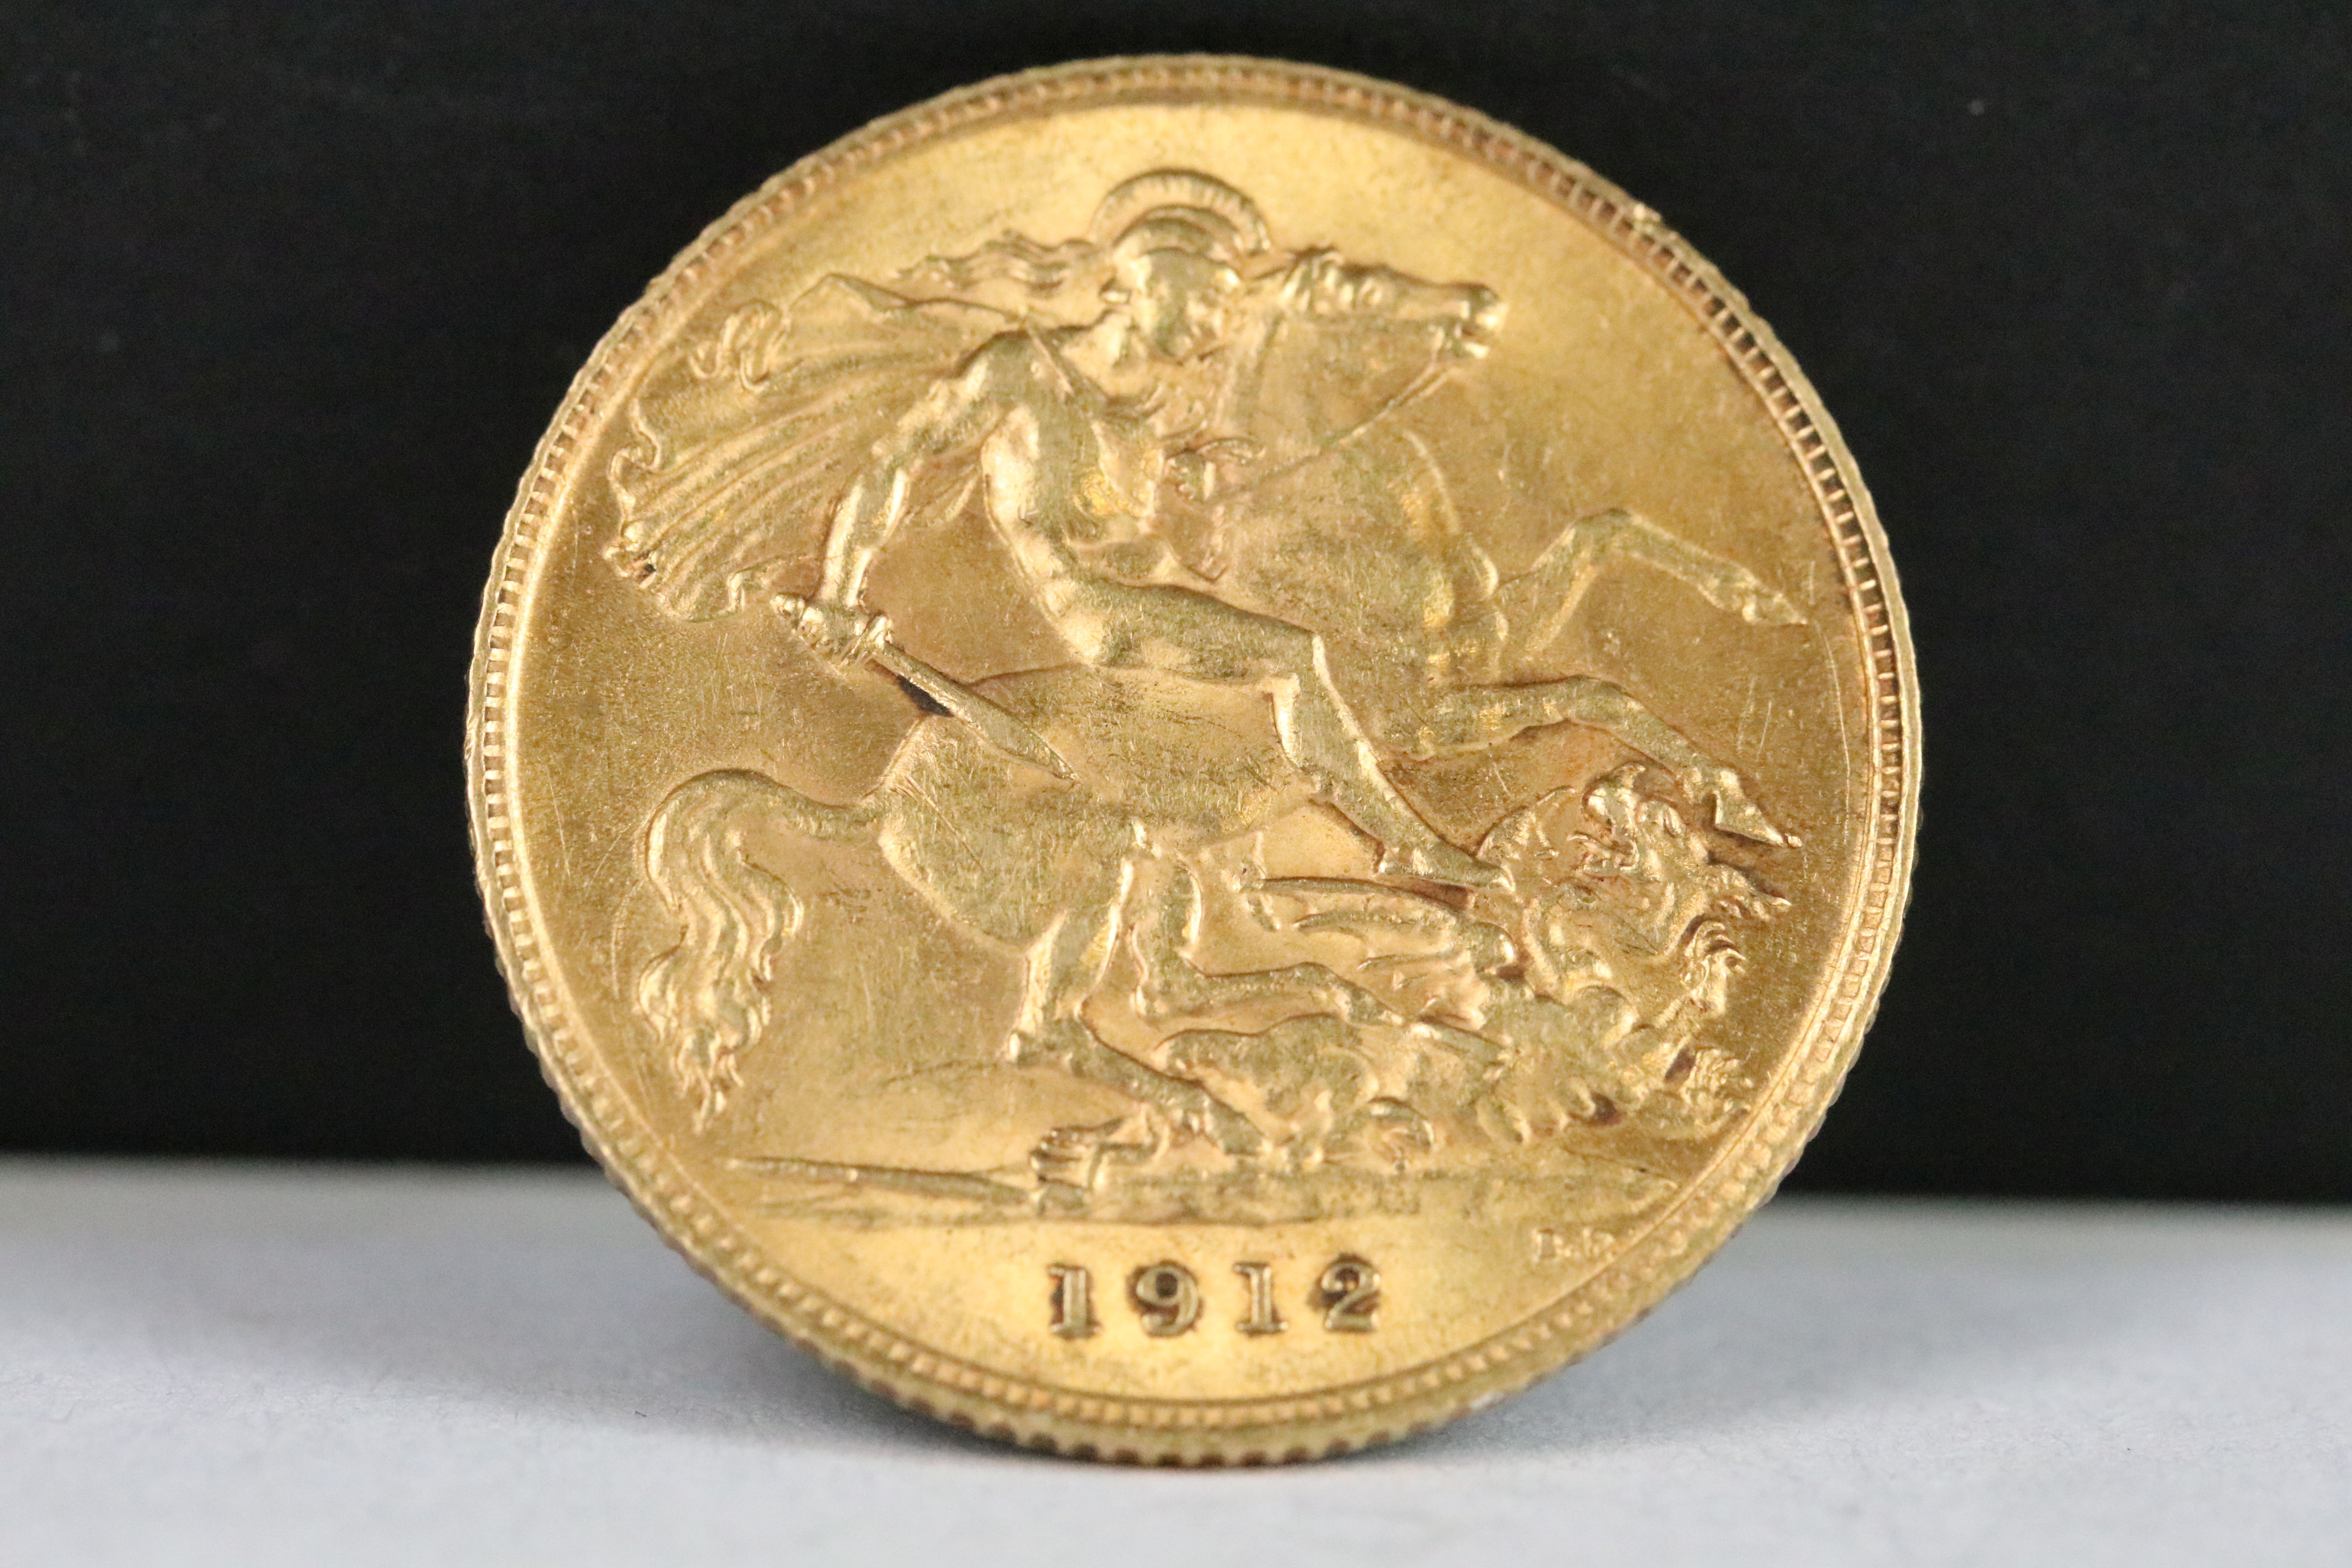 A British King George V 1912 gold half sovereign coin.